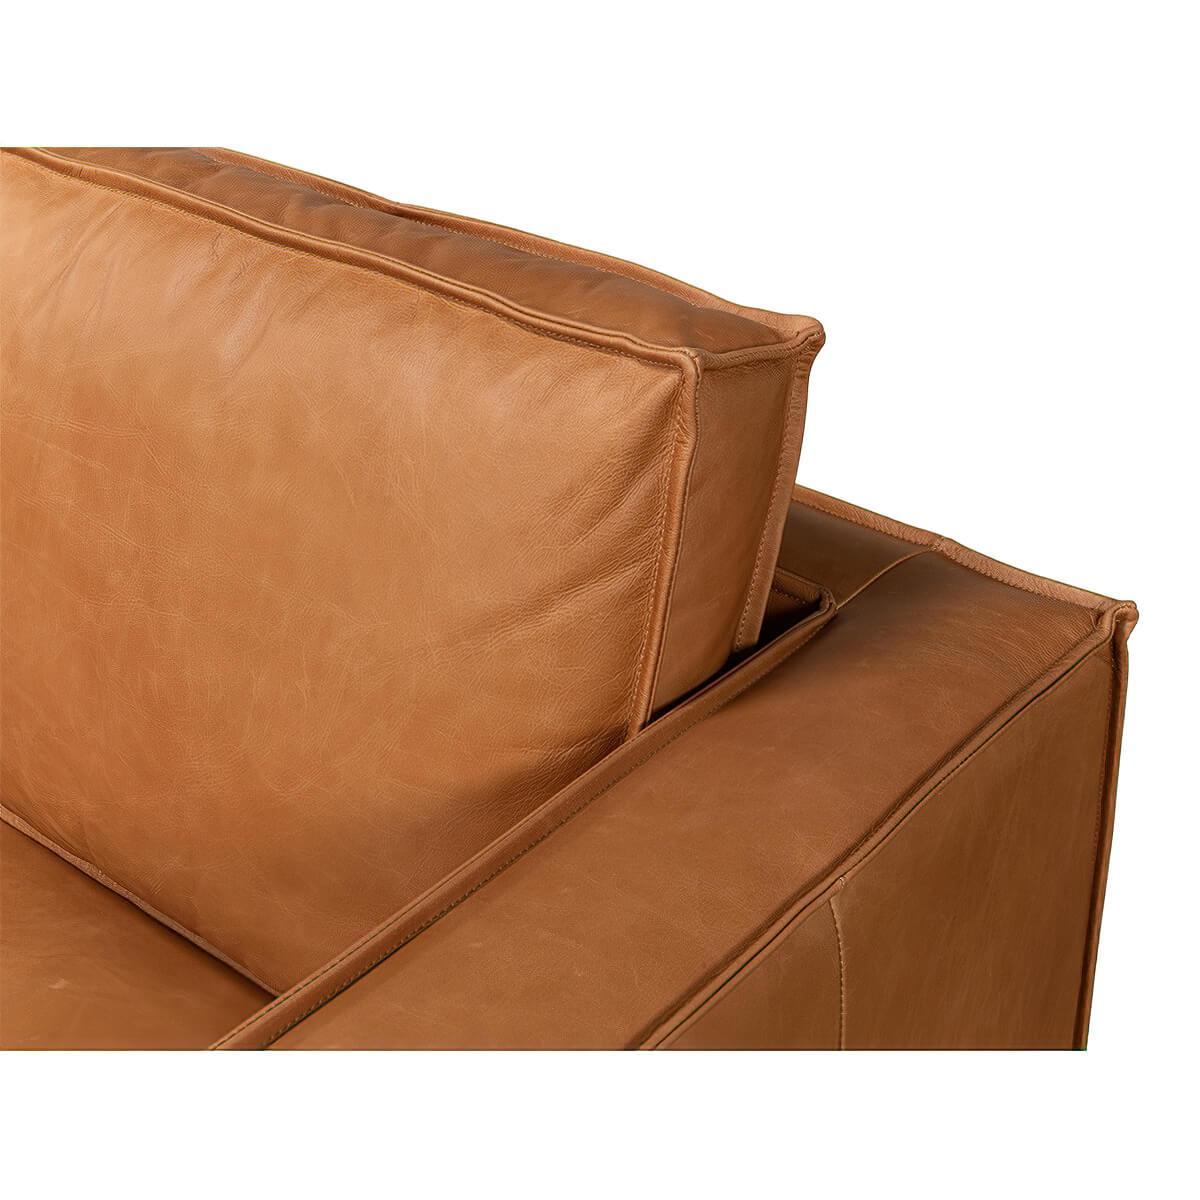 Asian Modern Leather Sofa For Sale